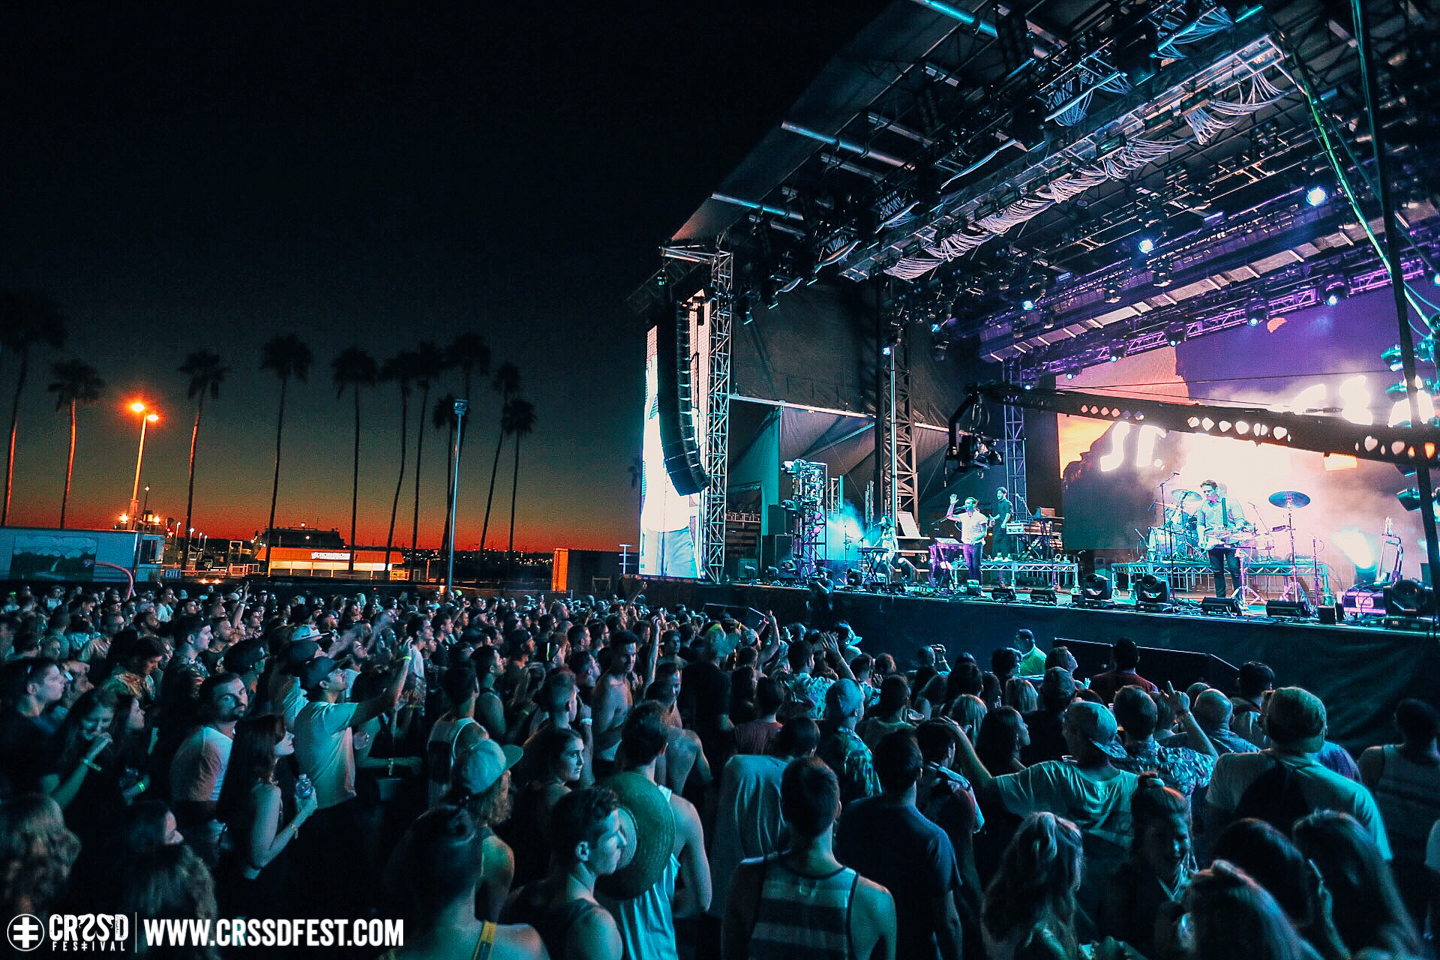 [FESTIVALS] CRSSD Brings the Darkness to San Diego with Cirez D, Gesaffelstein, Tale of US & More